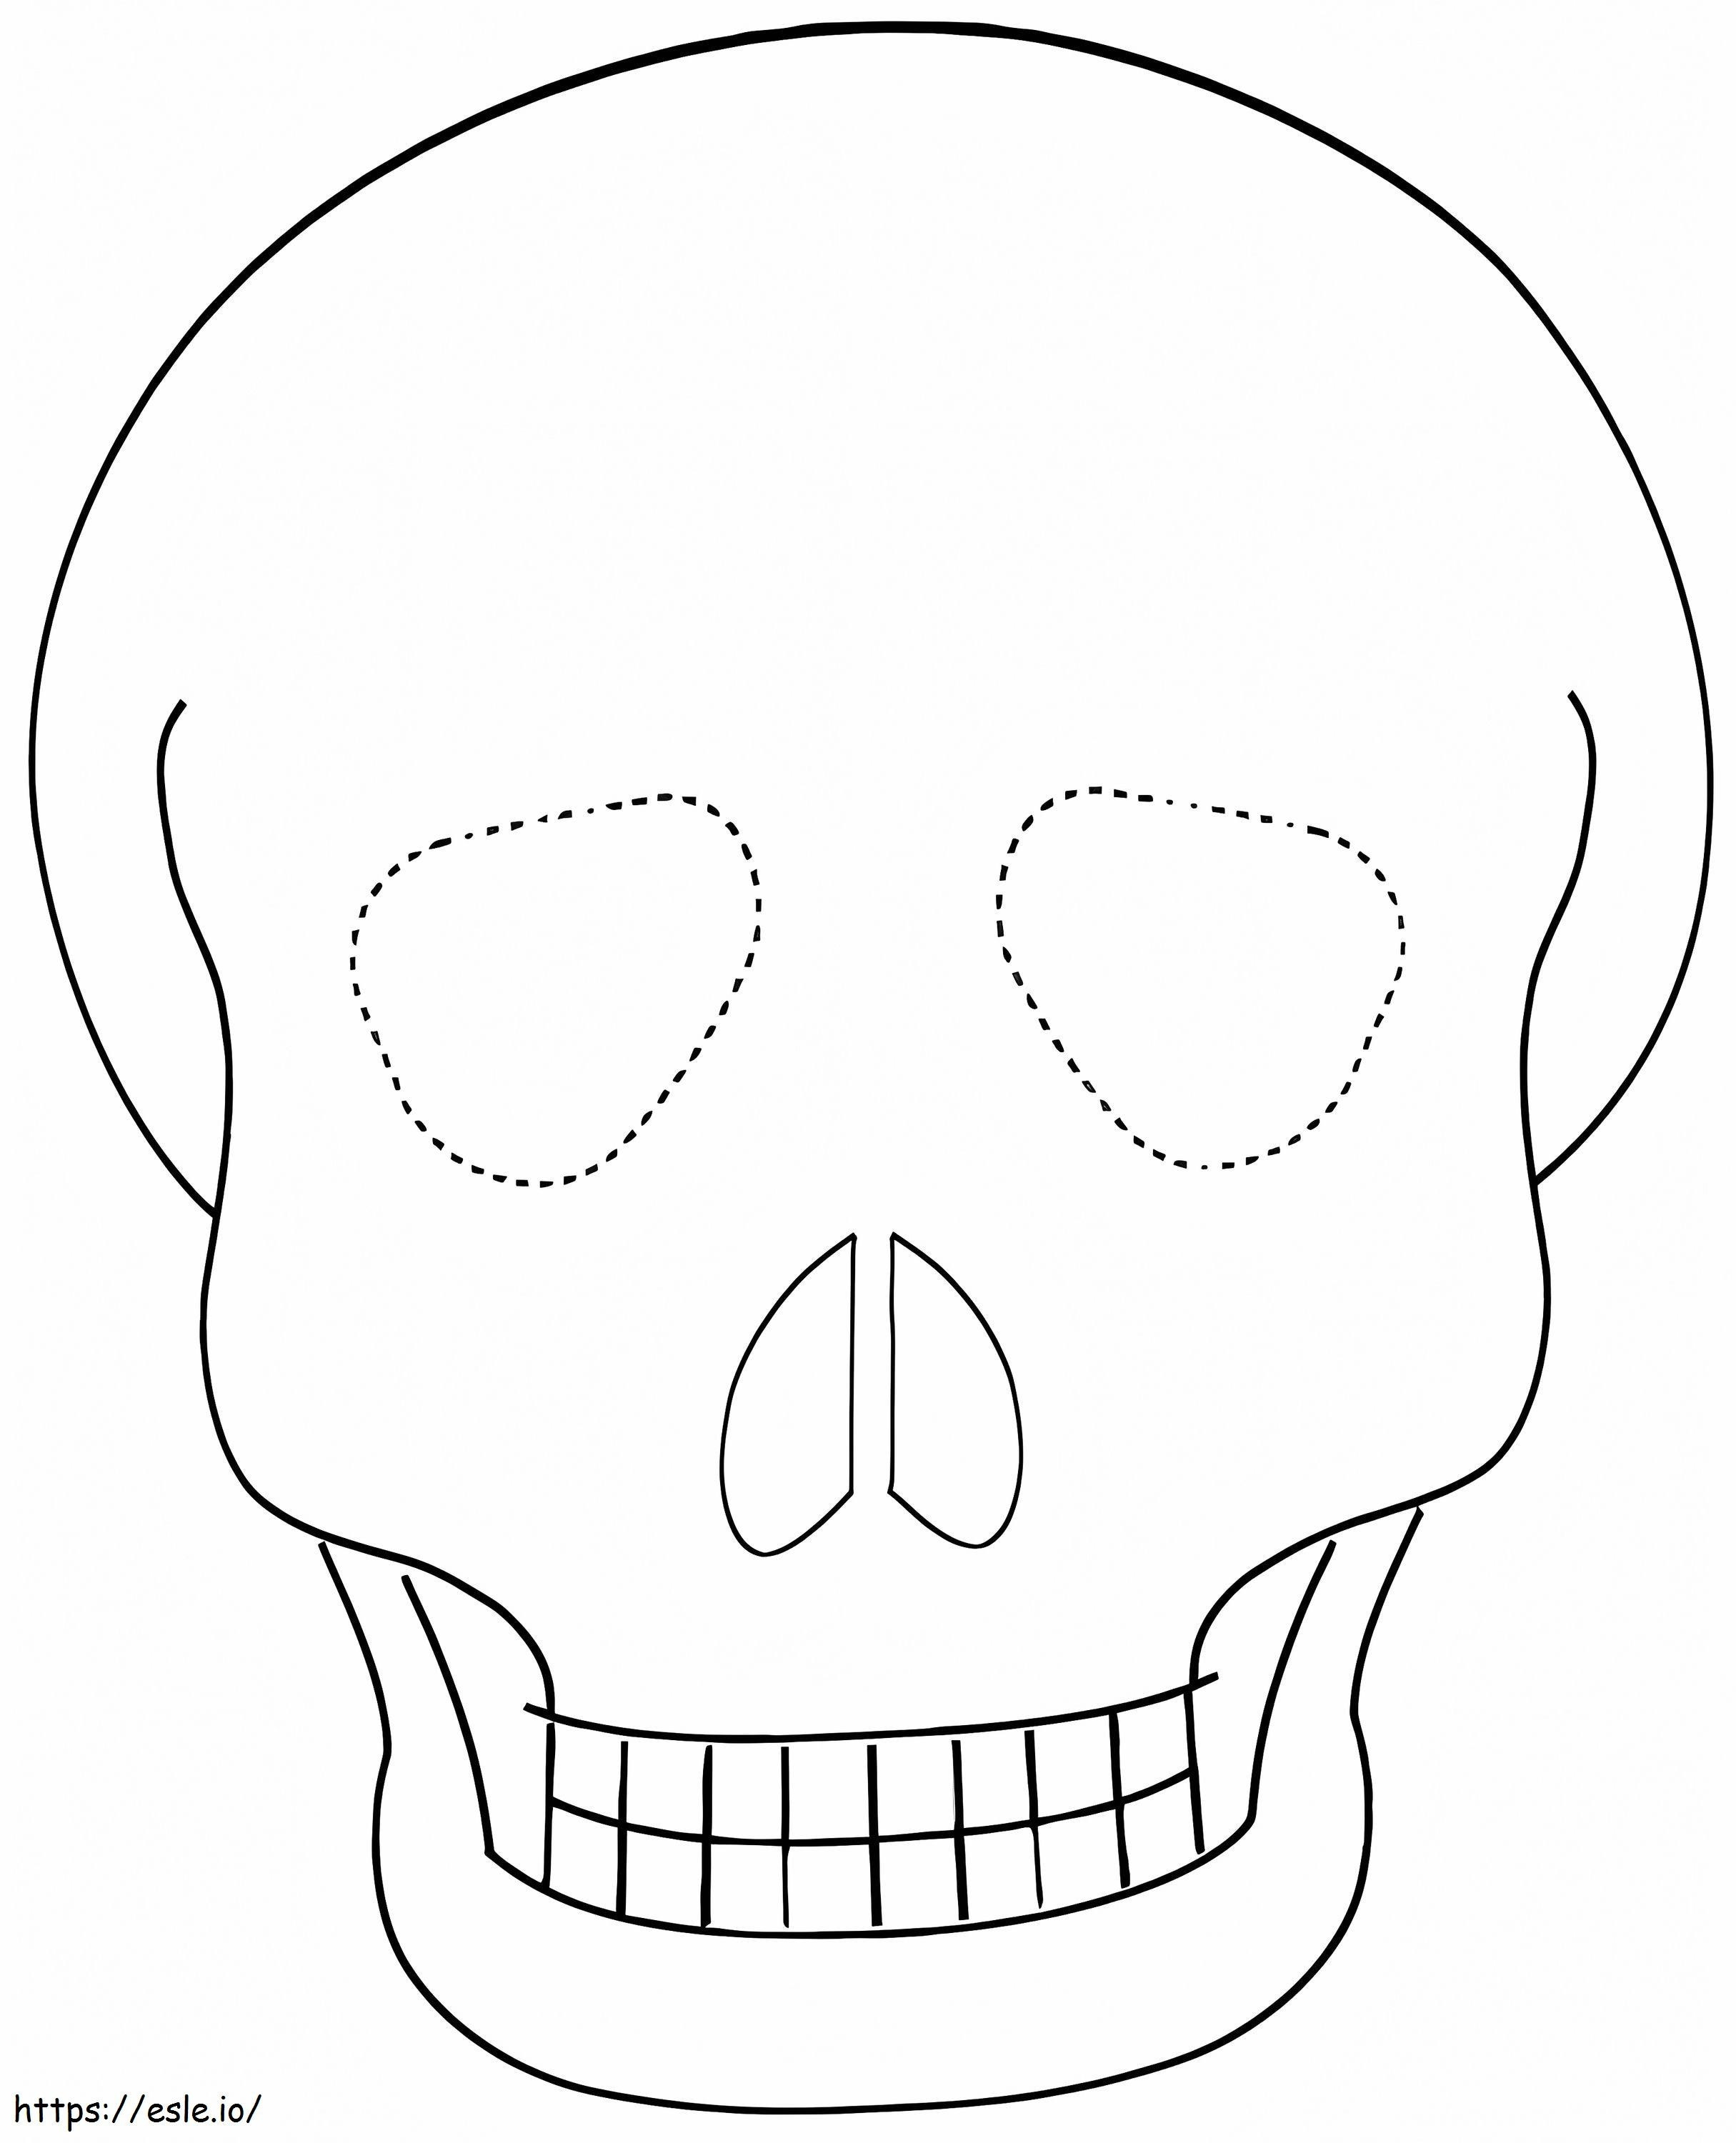 Halloween Mask 5 coloring page